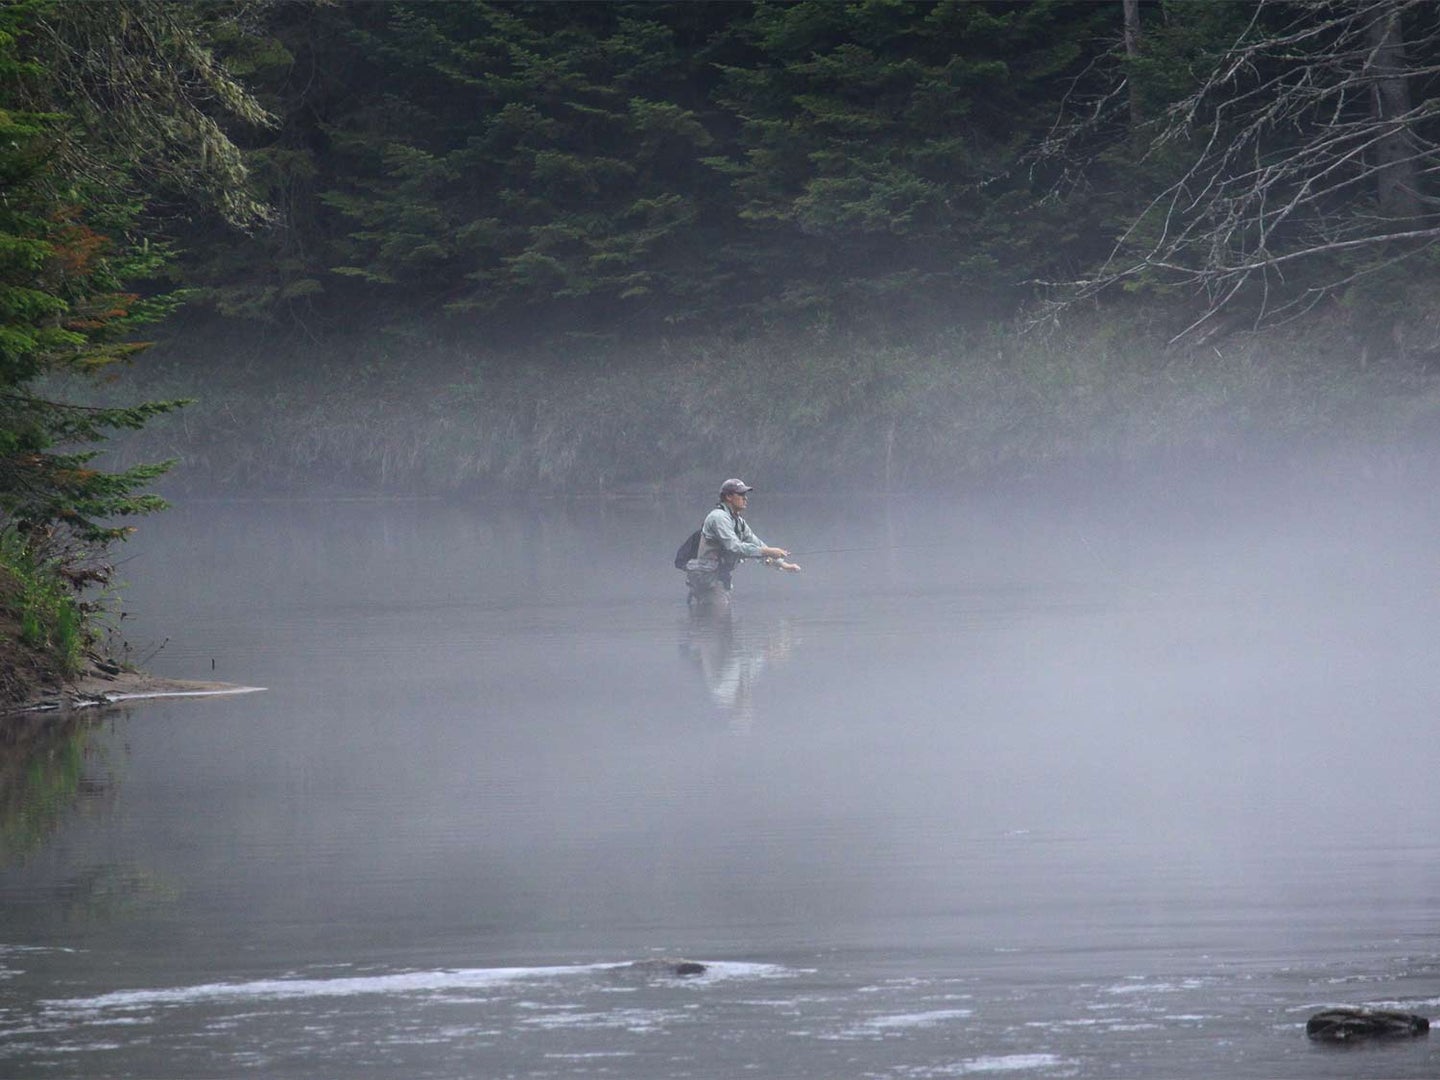 A fly angler wading through a river and fishing in the fog.